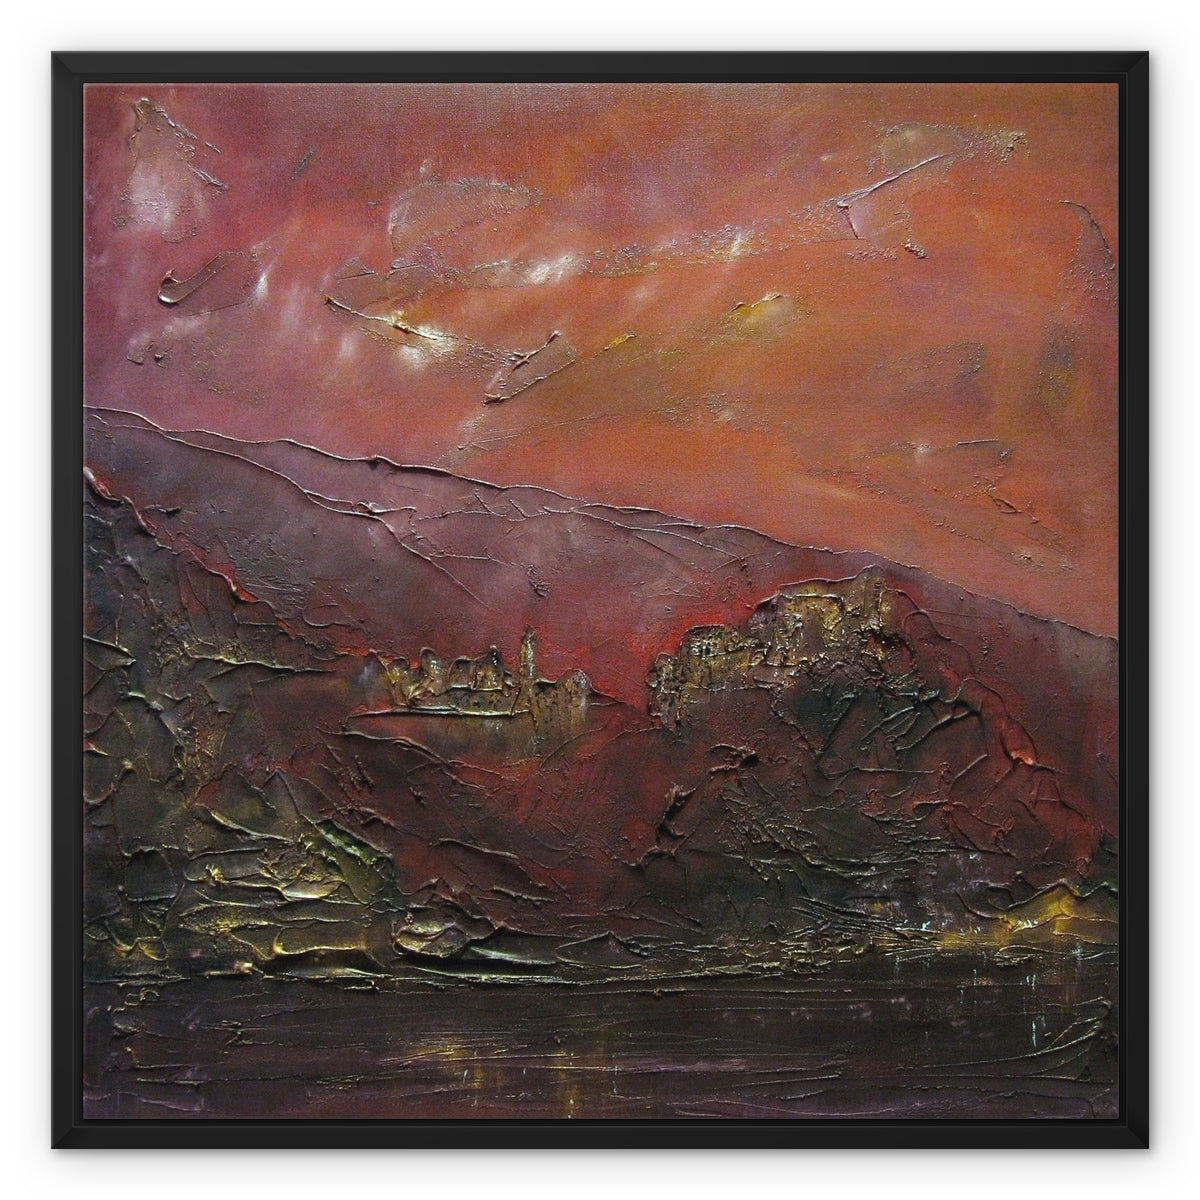 Corniglia Dusk Italy Painting | Framed Canvas From Scotland-Floating Framed Canvas Prints-World Art Gallery-24"x24"-Black Frame-Paintings, Prints, Homeware, Art Gifts From Scotland By Scottish Artist Kevin Hunter